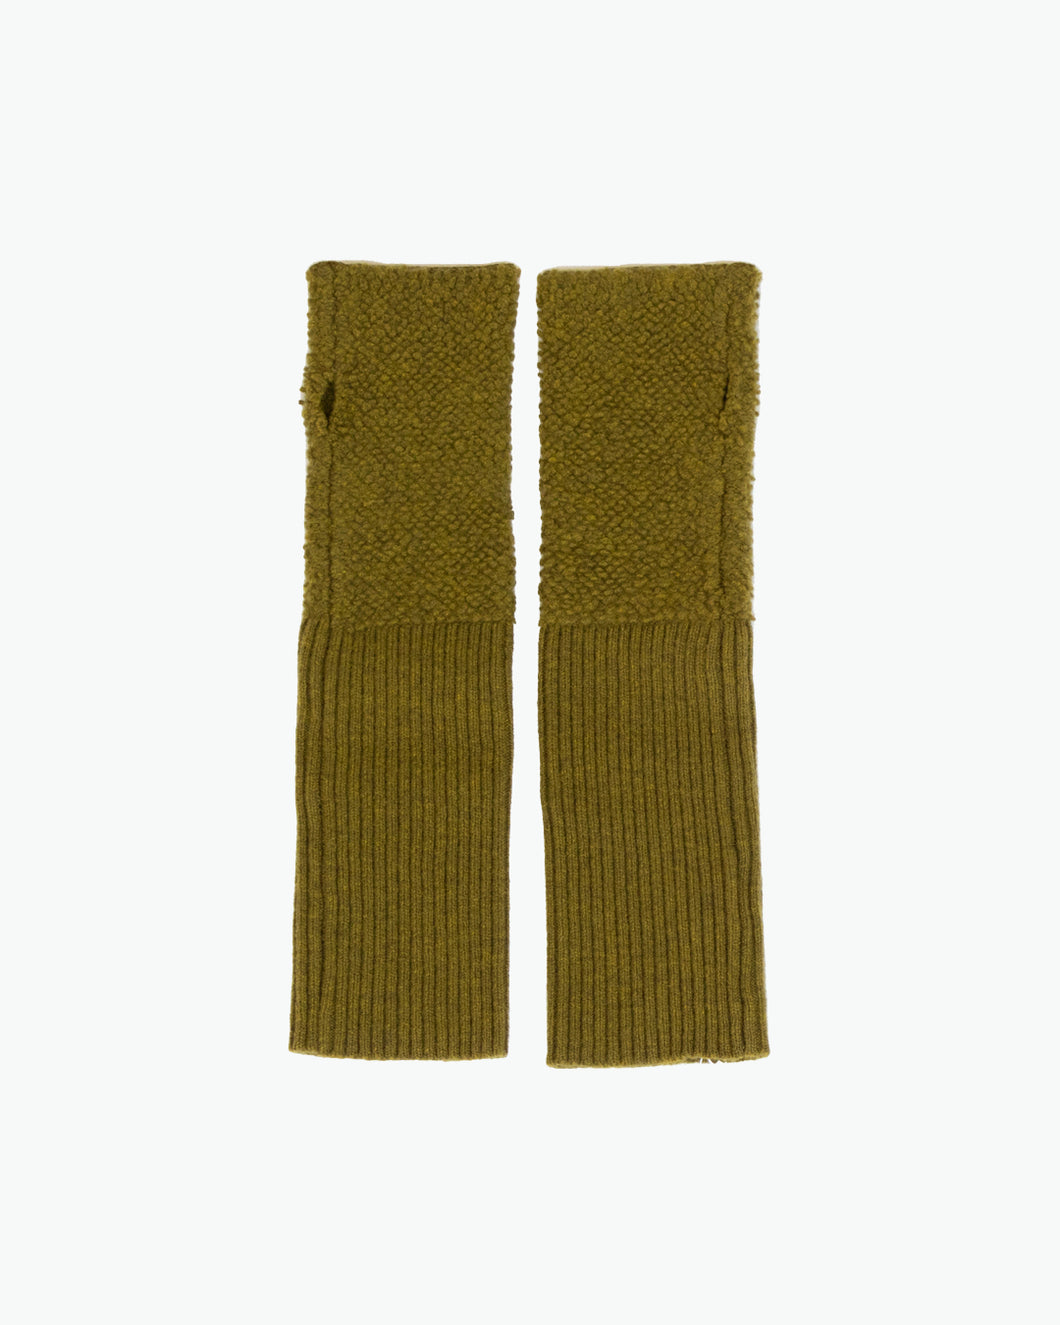 Finger hole arm warmers